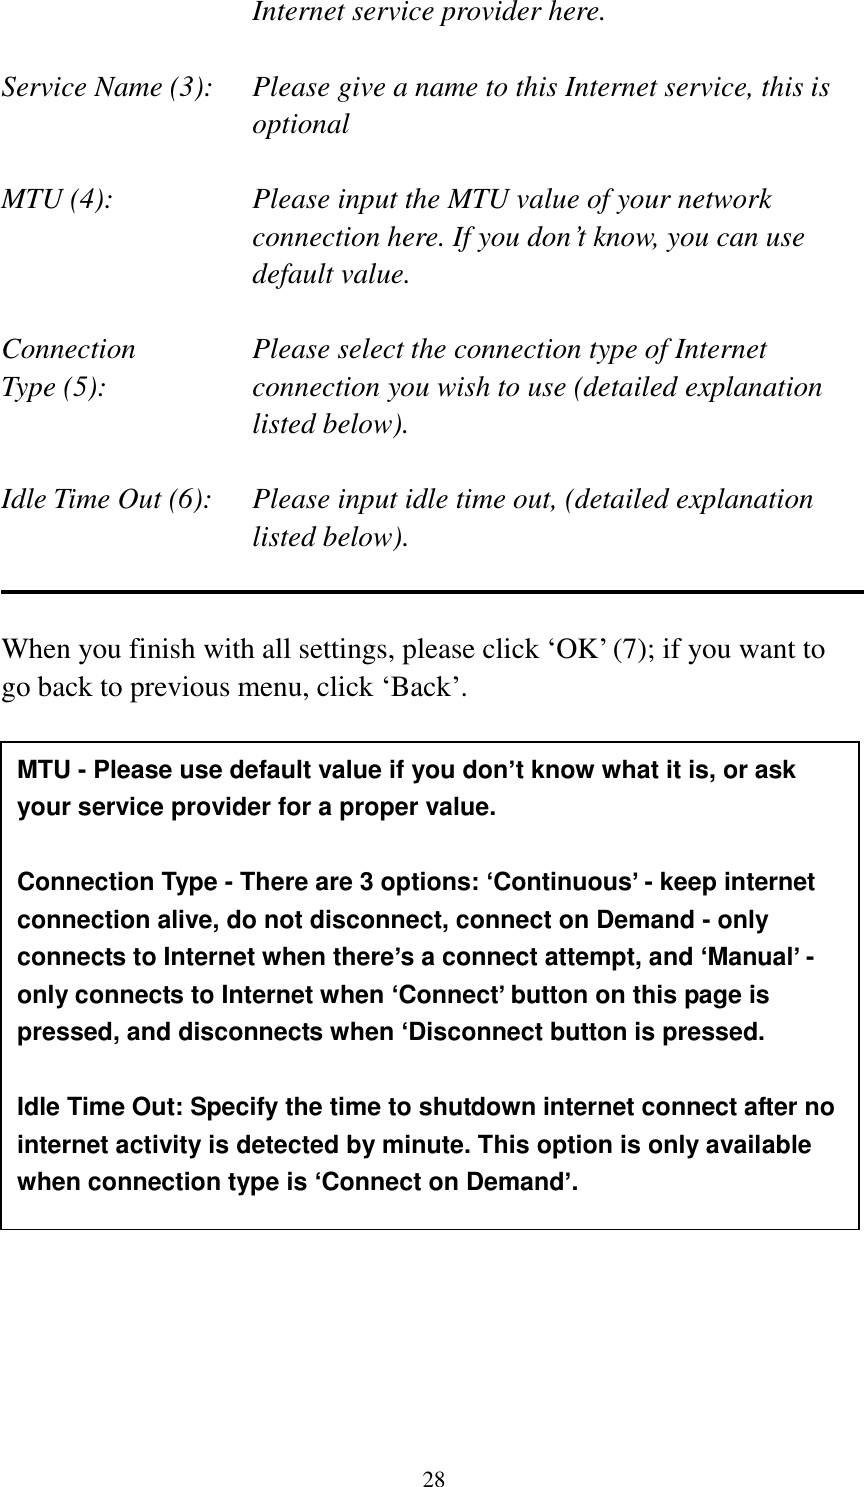 28 Internet service provider here.  Service Name (3):    Please give a name to this Internet service, this is optional  MTU (4):    Please input the MTU value of your network connection here. If you don‟t know, you can use default value.  Connection       Please select the connection type of Internet Type (5):    connection you wish to use (detailed explanation listed below).  Idle Time Out (6):    Please input idle time out, (detailed explanation listed below).   When you finish with all settings, please click „OK‟ (7); if you want to go back to previous menu, click „Back‟.                      MTU - Please use default value if you don’t know what it is, or ask your service provider for a proper value.  Connection Type - There are 3 options: ‘Continuous’ - keep internet connection alive, do not disconnect, connect on Demand - only connects to Internet when there’s a connect attempt, and ‘Manual’ - only connects to Internet when ‘Connect’ button on this page is pressed, and disconnects when ‘Disconnect button is pressed.  Idle Time Out: Specify the time to shutdown internet connect after no internet activity is detected by minute. This option is only available when connection type is ‘Connect on Demand’. 